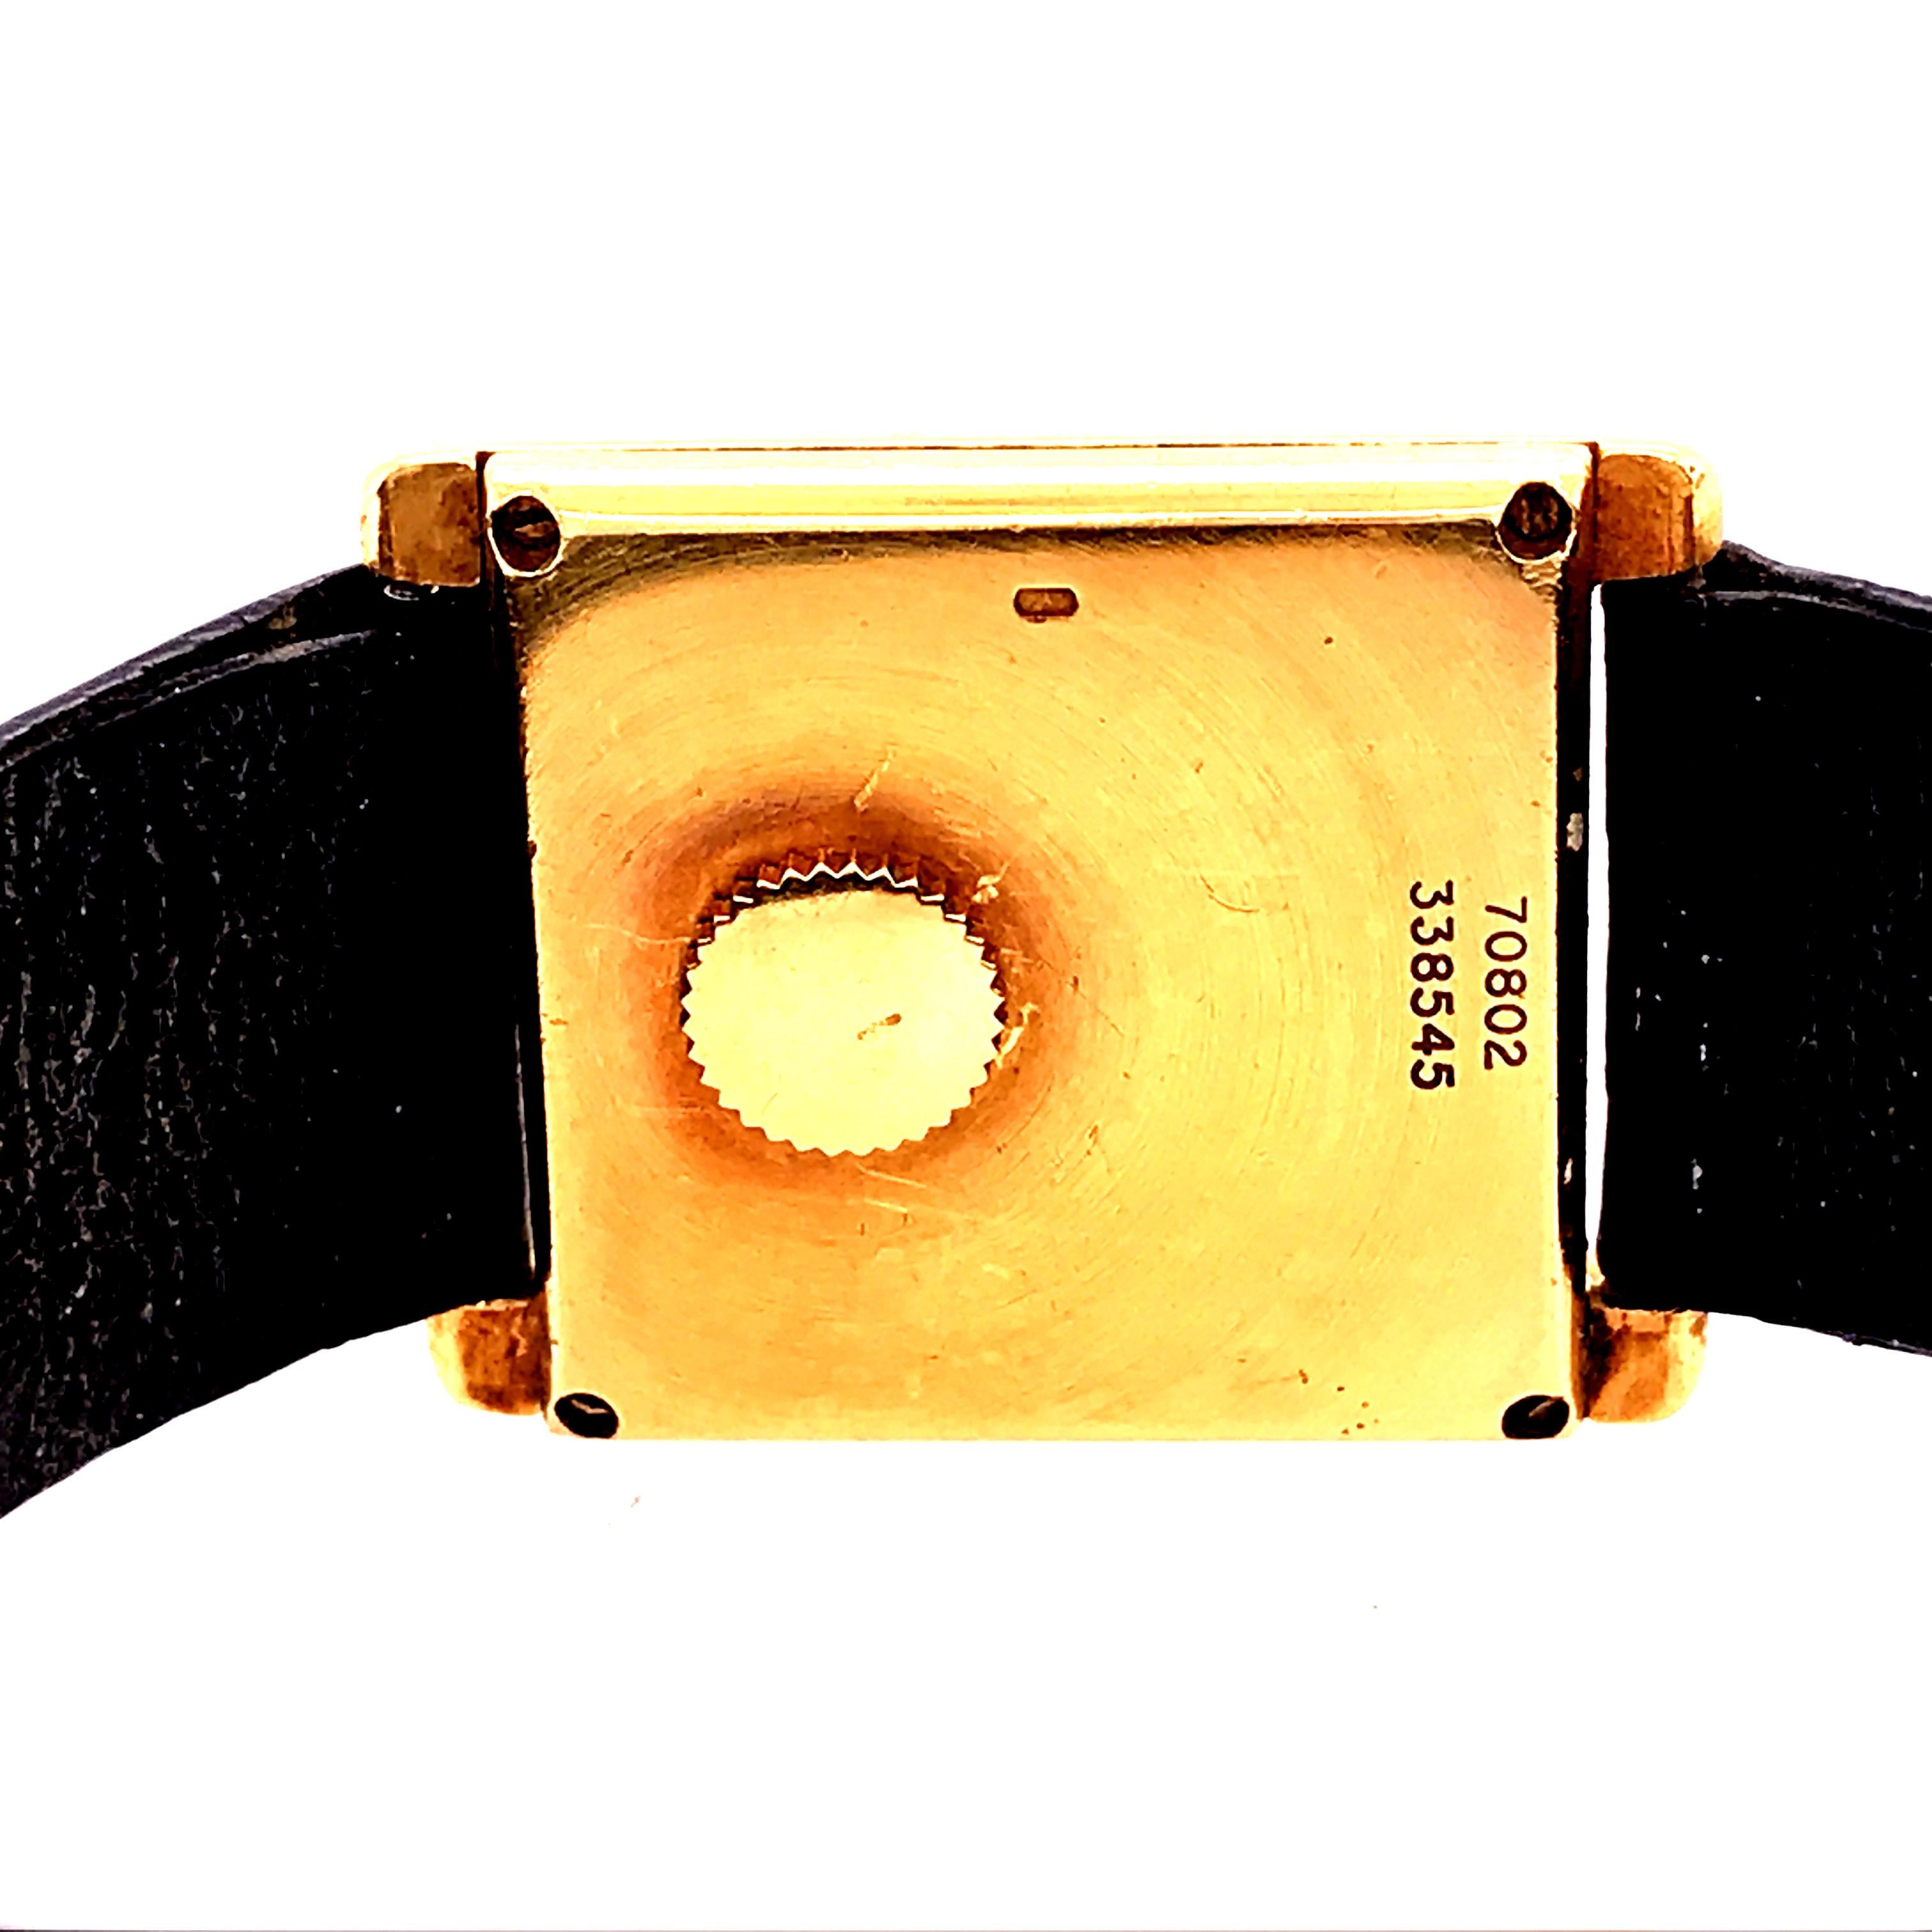 18K Yellow Gold Piaget Tank Watch with black leather band.  Square black Face with 18K Yellow Gold Case & Buckle.  70802  338545